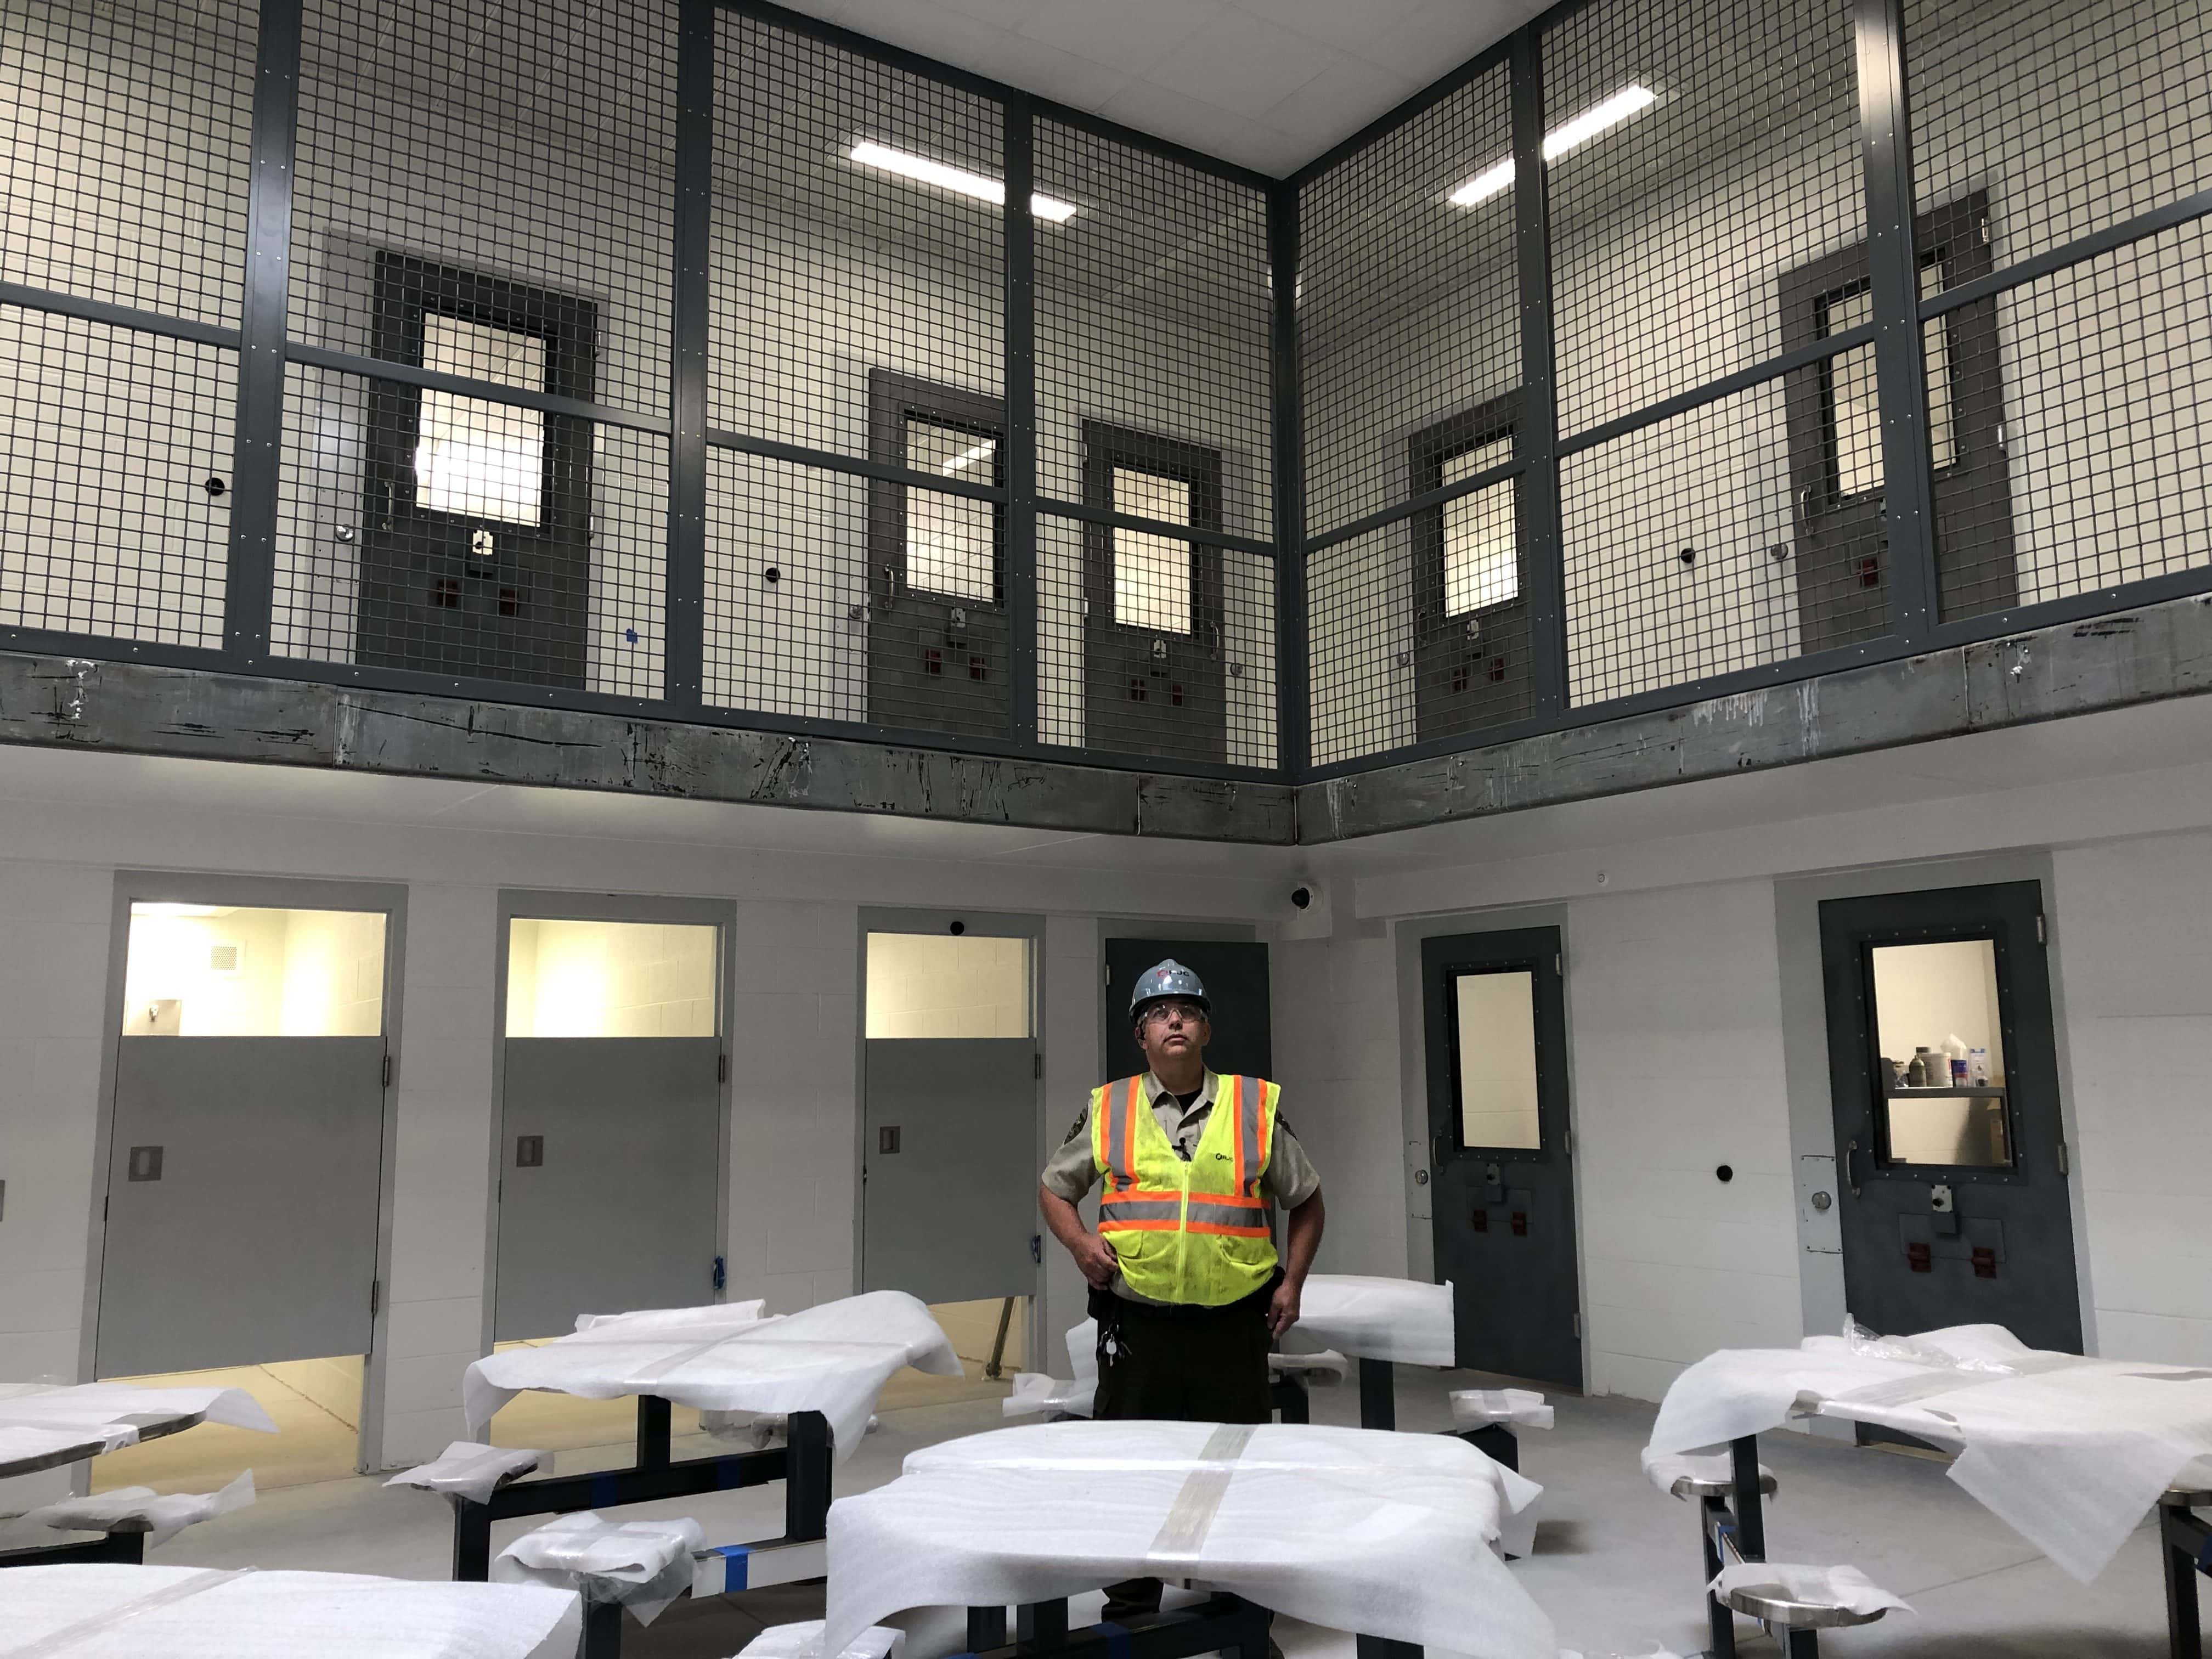 Here's a look at Lee County's new jail facility | WGLC